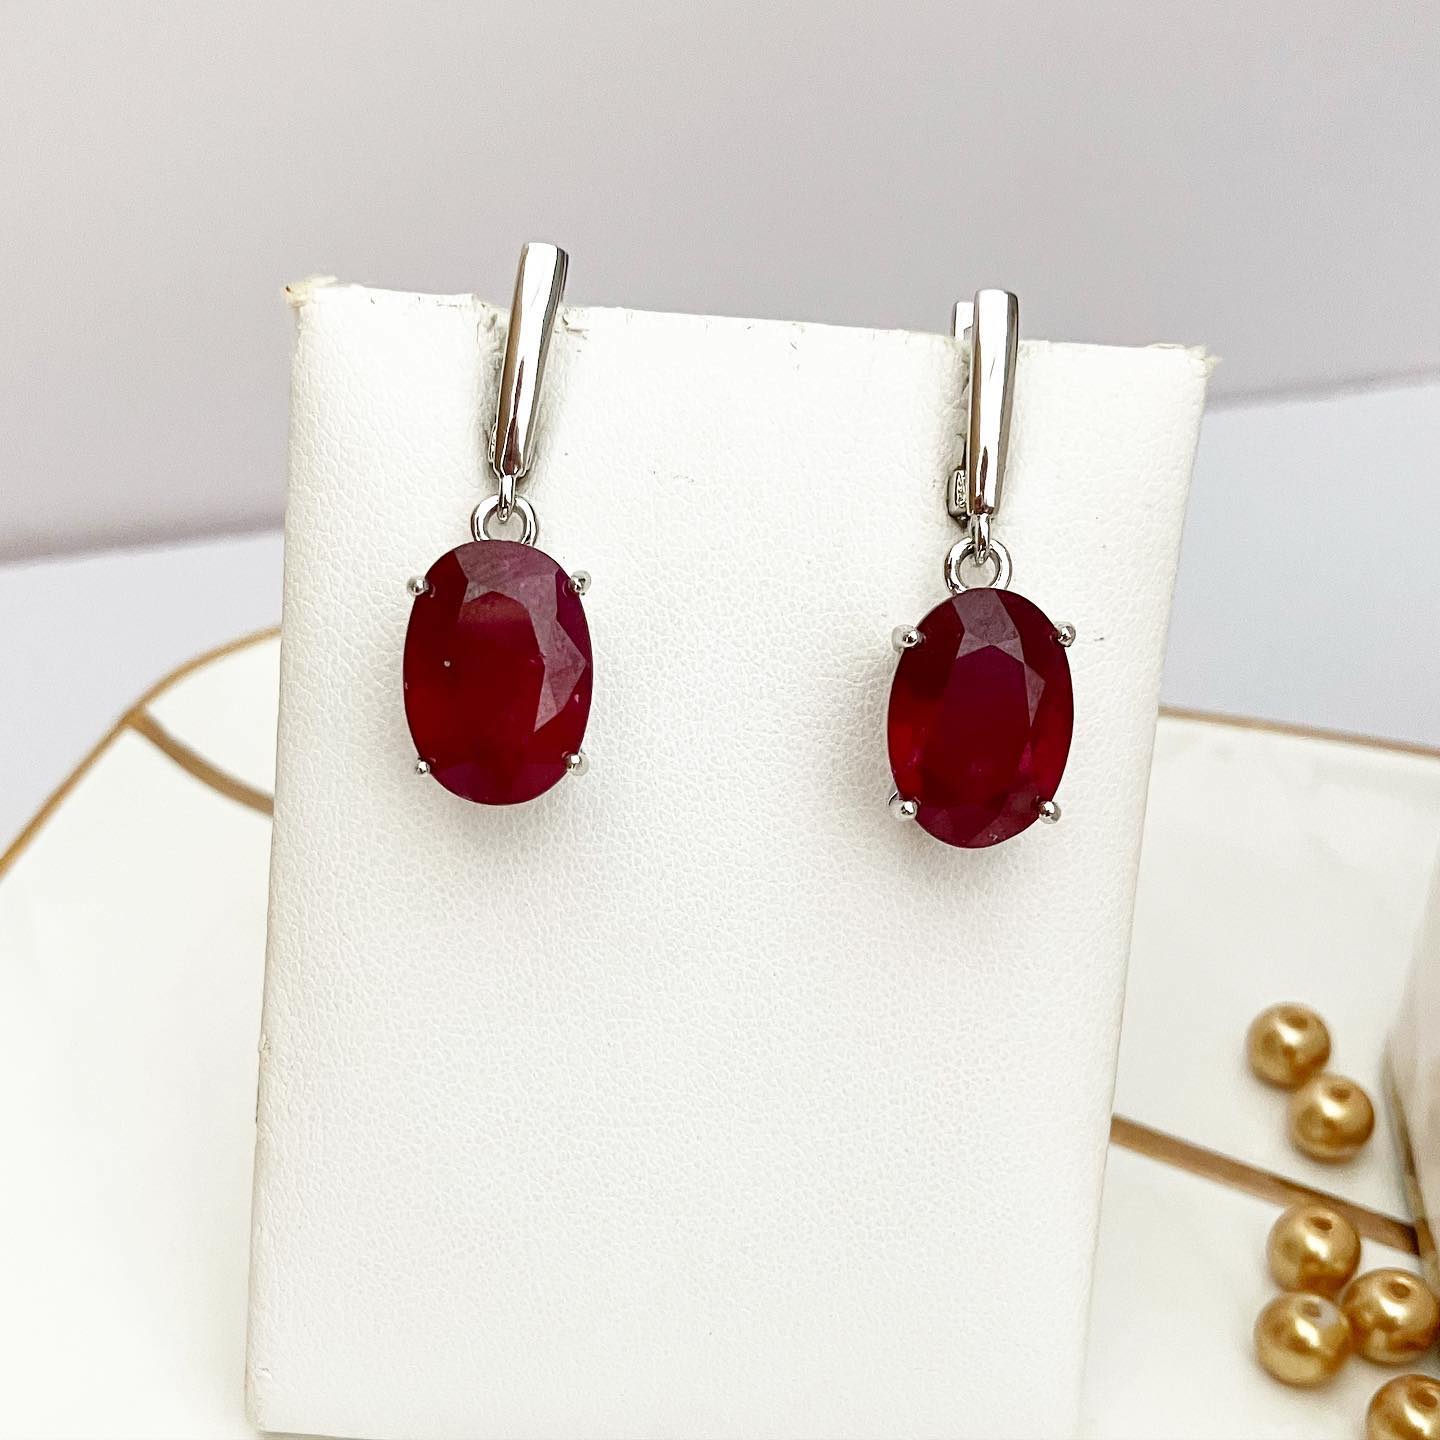 Earrings 925 sterling silver with ruby.